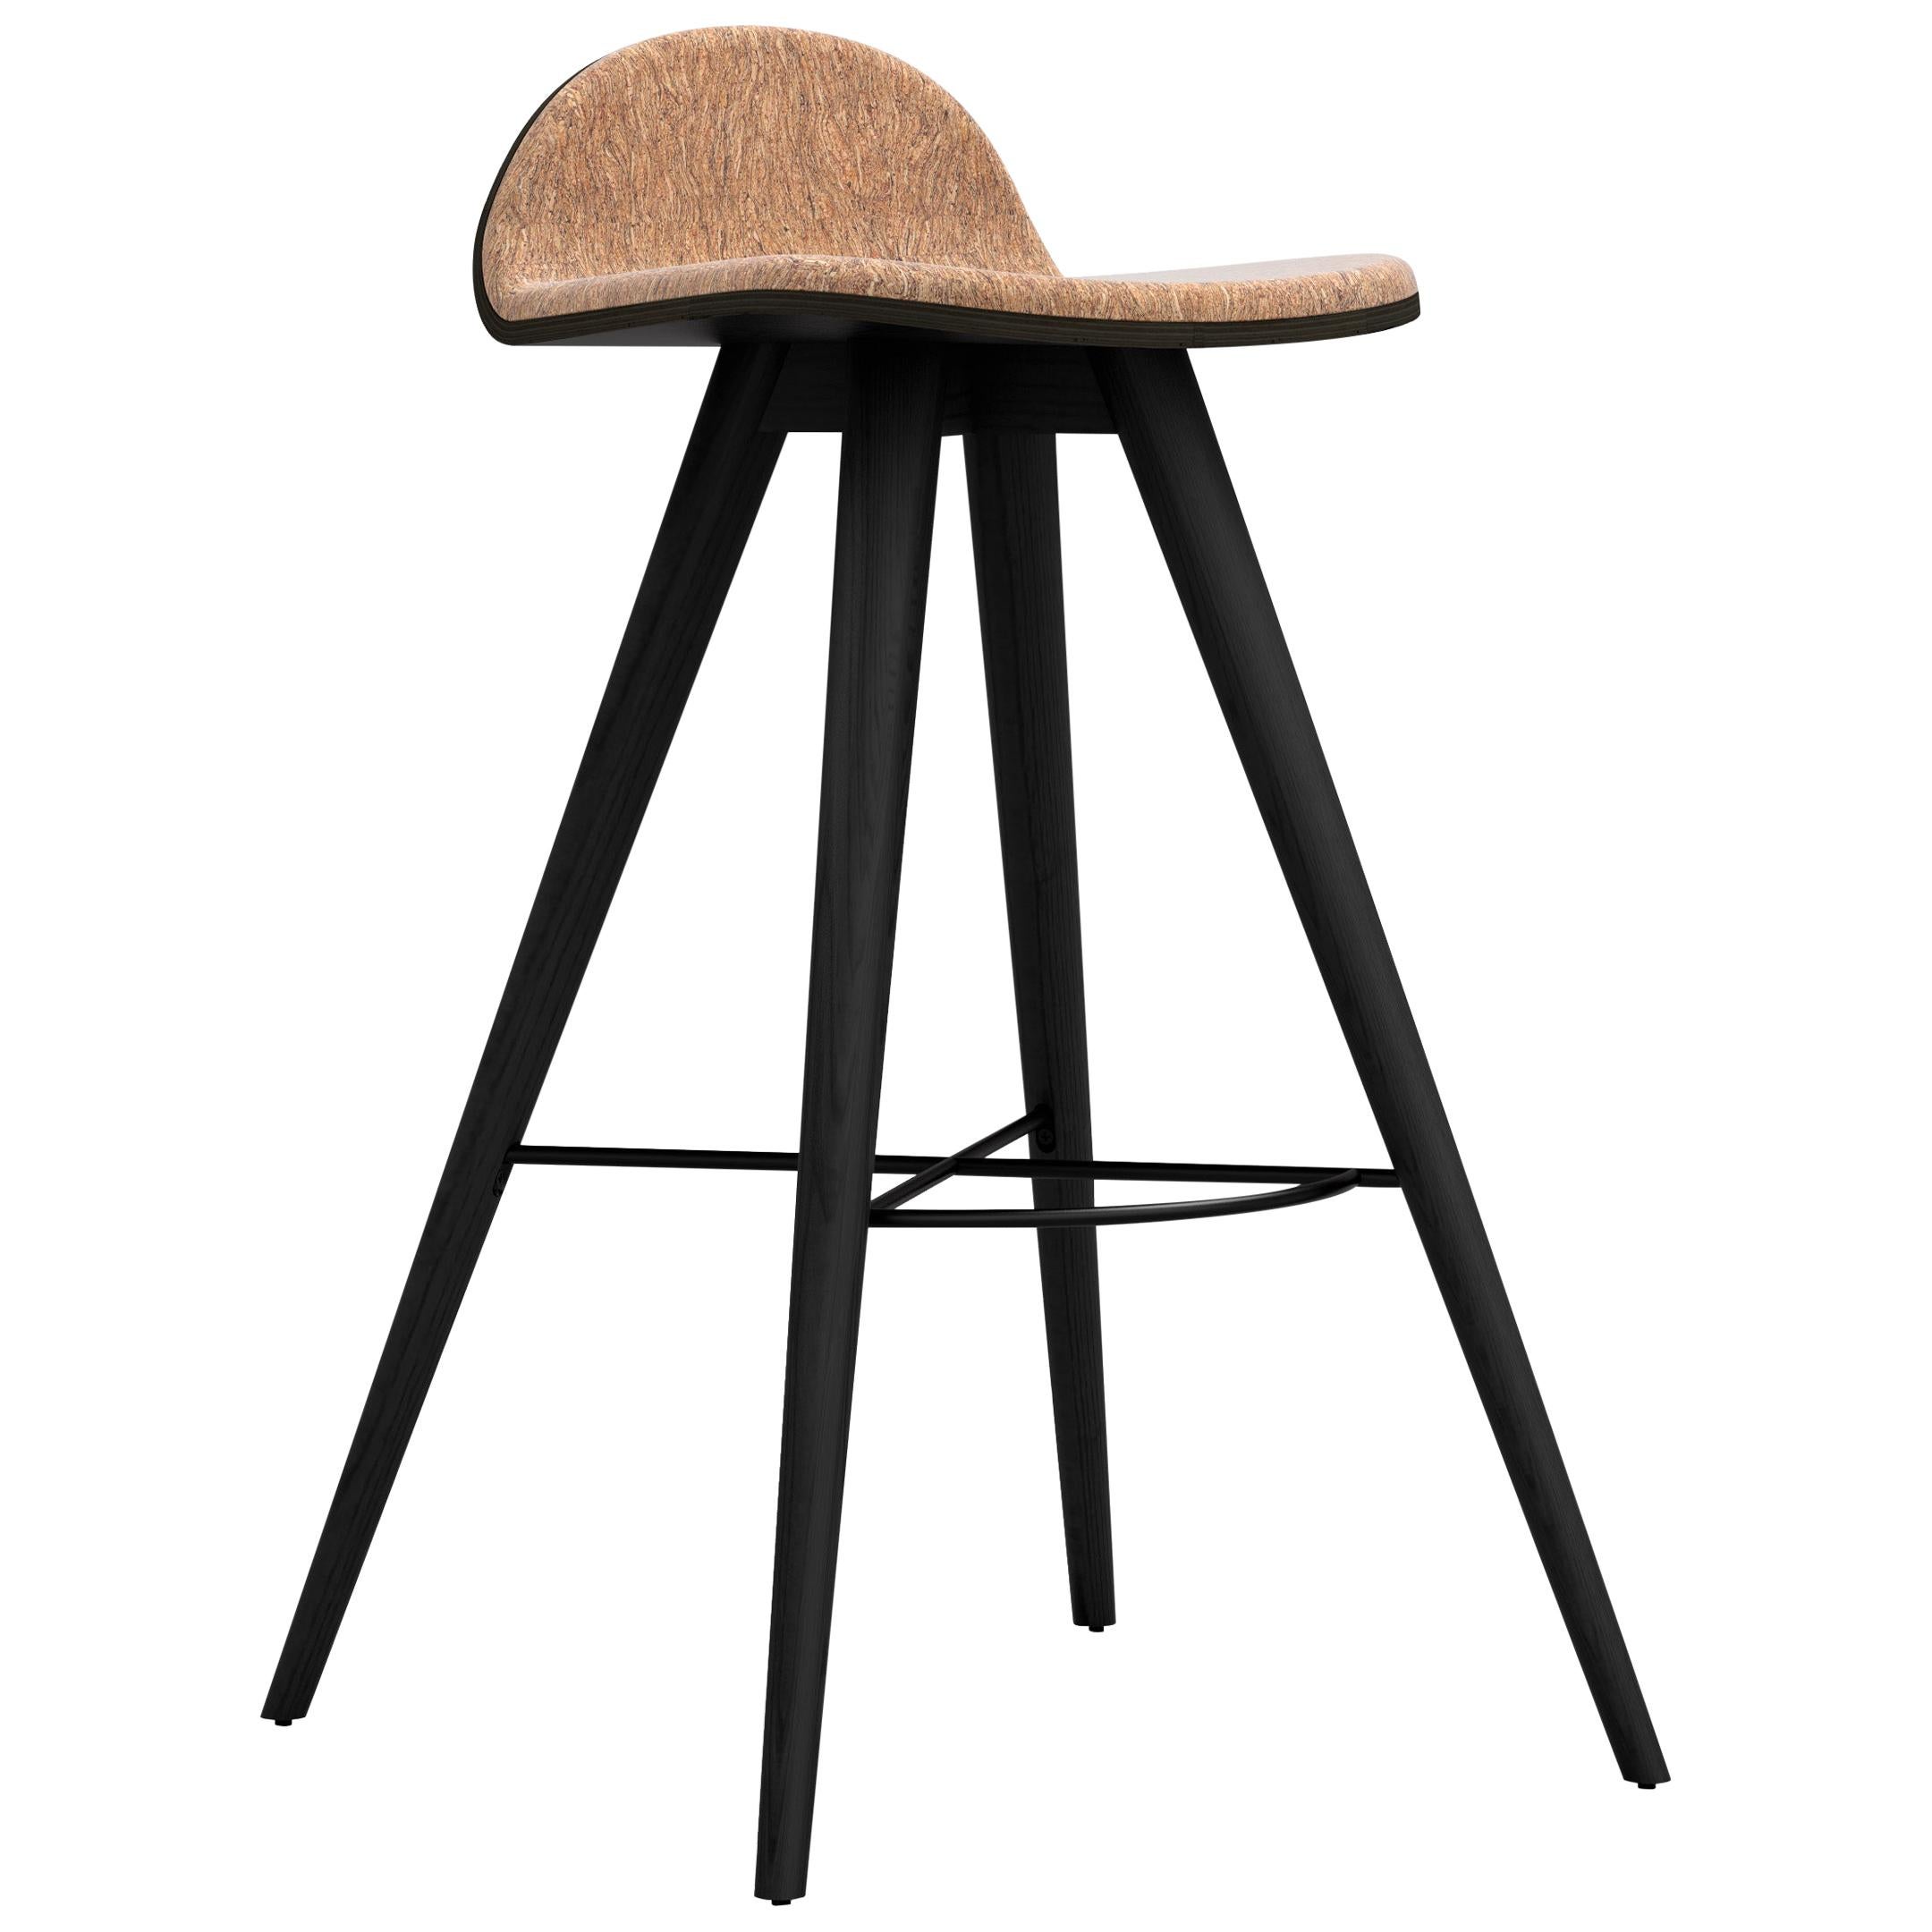 Painted Ash and Corkfabric Contemporary High Stool by Alexandre Caldas For Sale